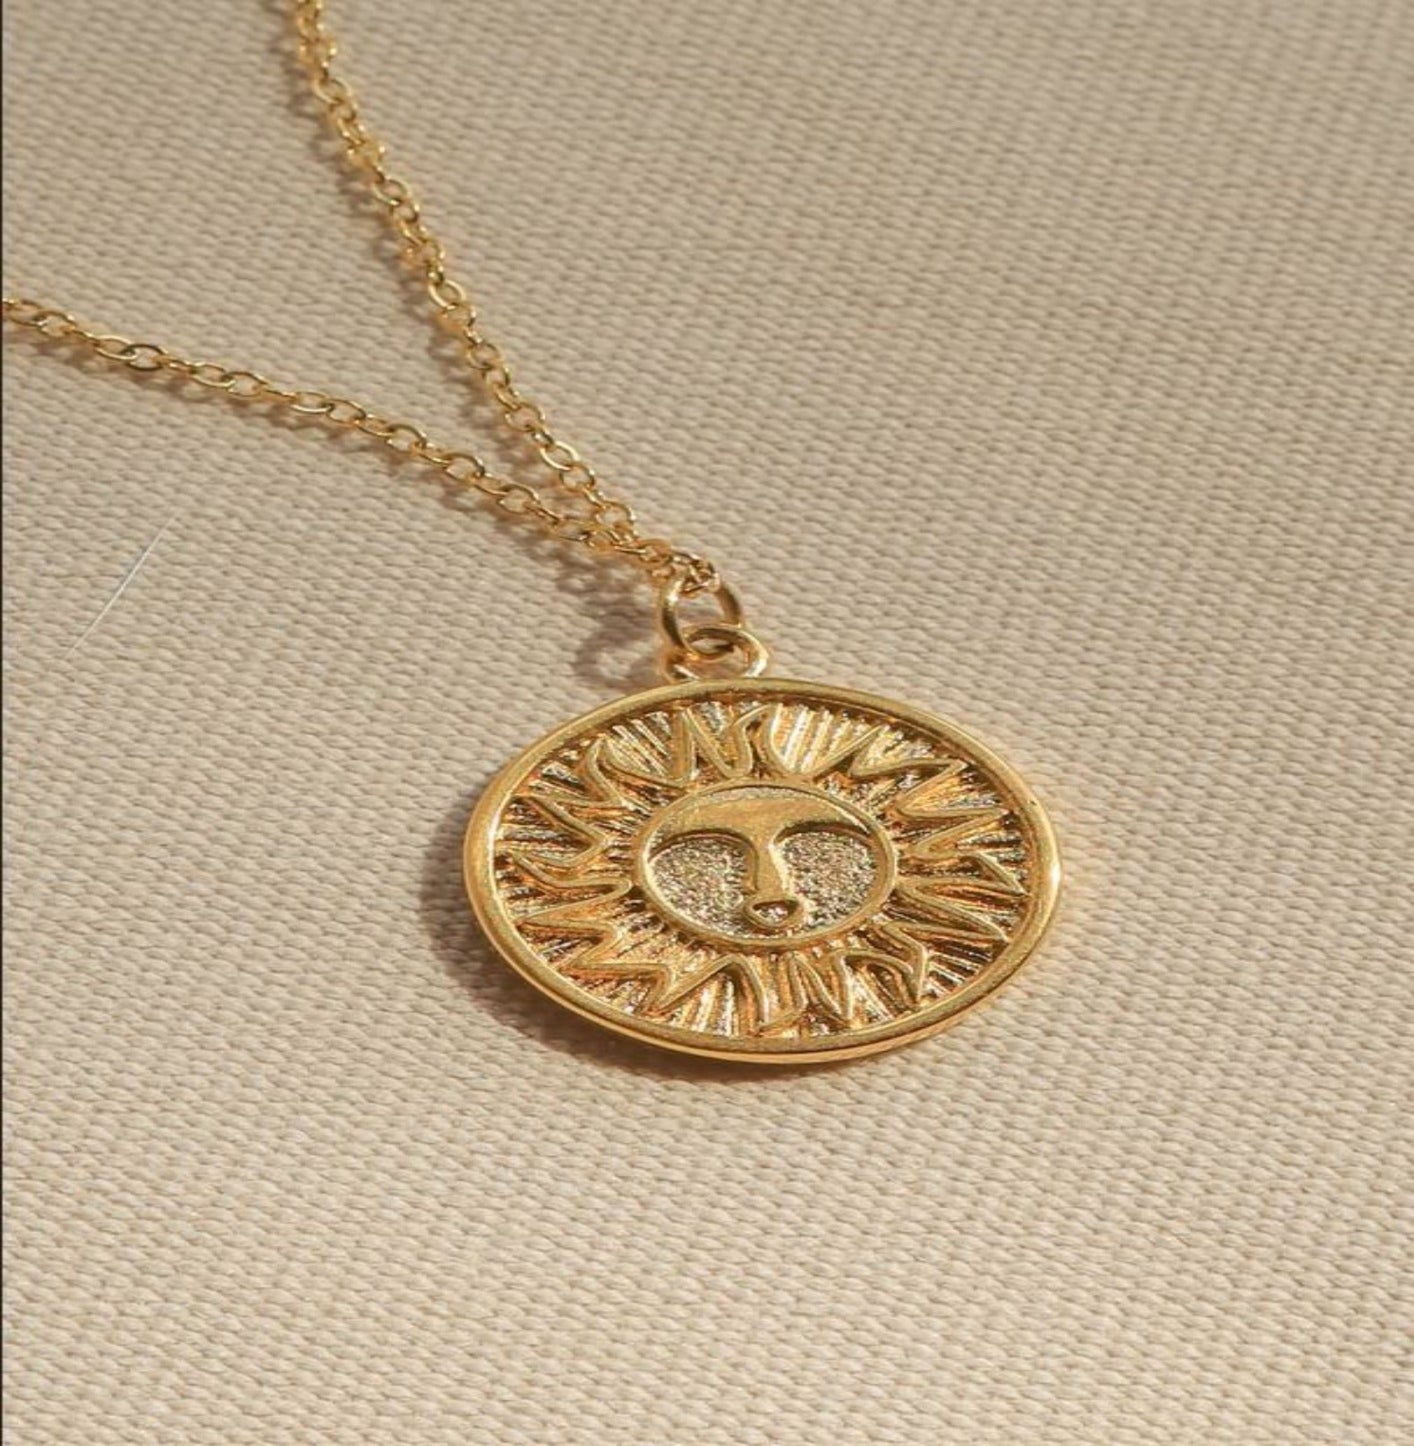 FACE SUN NECKLACE neck Yubama Jewelry Online Store - The Elegant Designs of Gold and Silver ! 